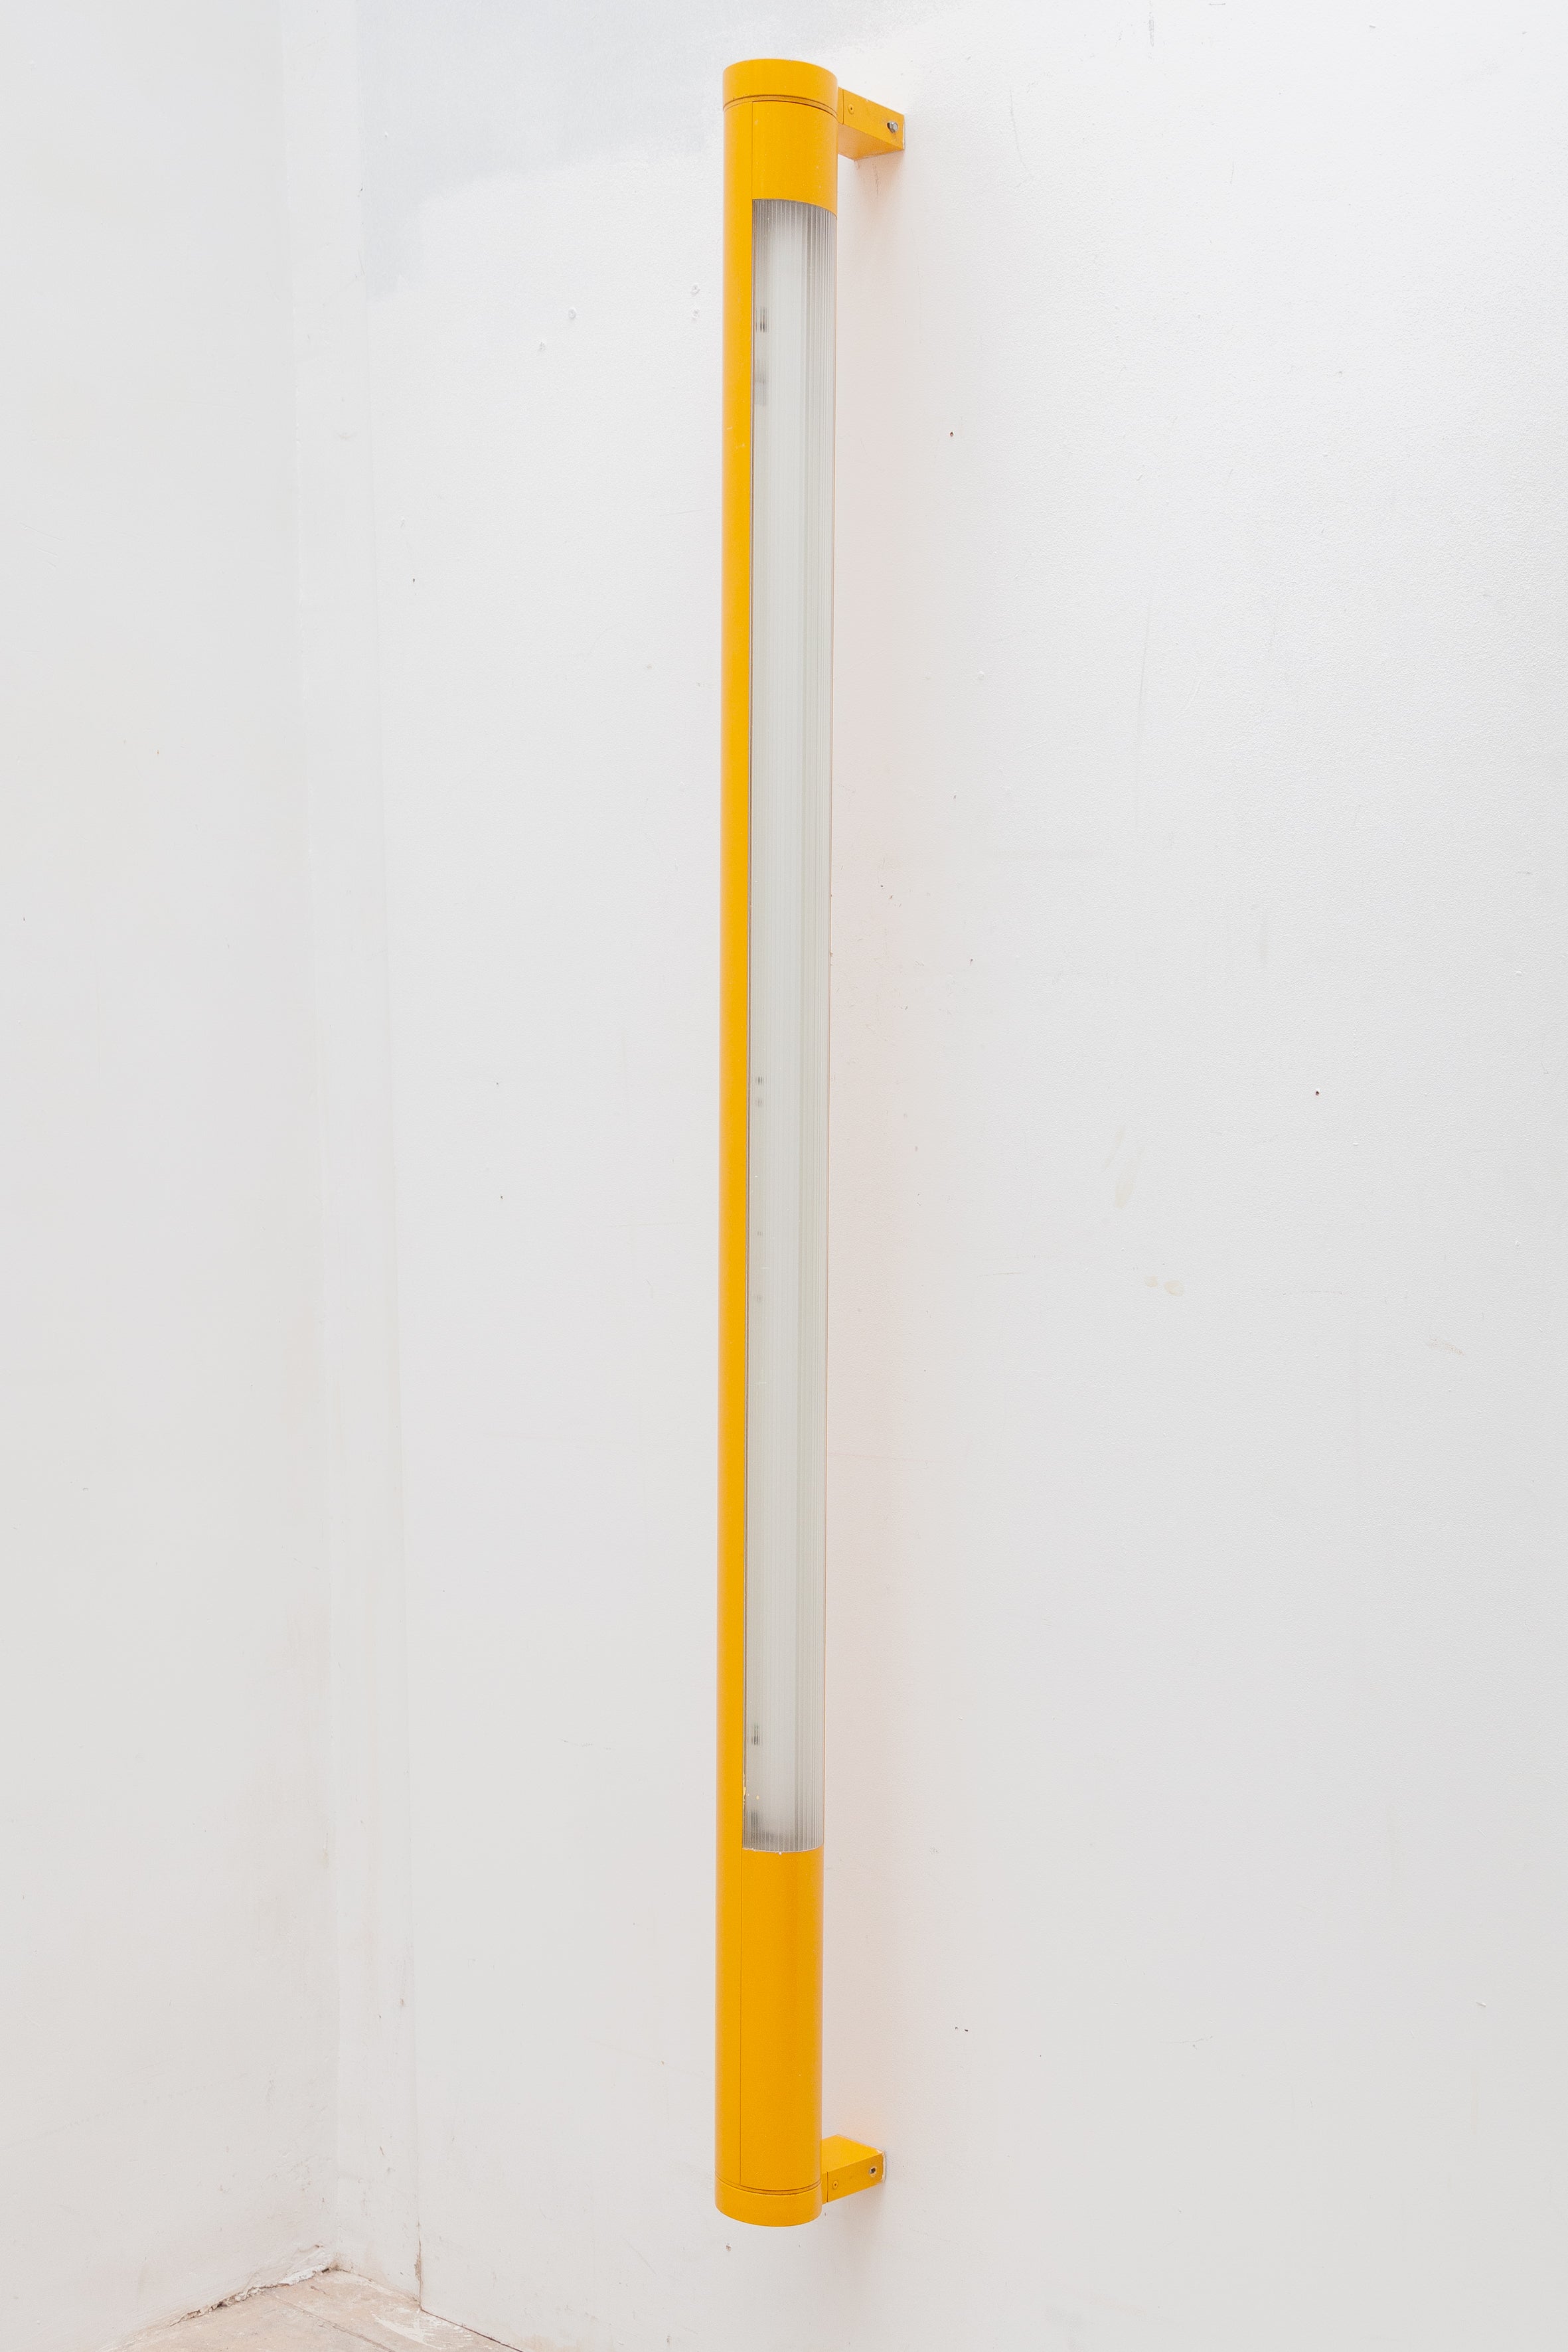 Mid-Century Modern Yellow Metal and Fluorescent Tube Wall Lamp, 1970s, Germany For Sale